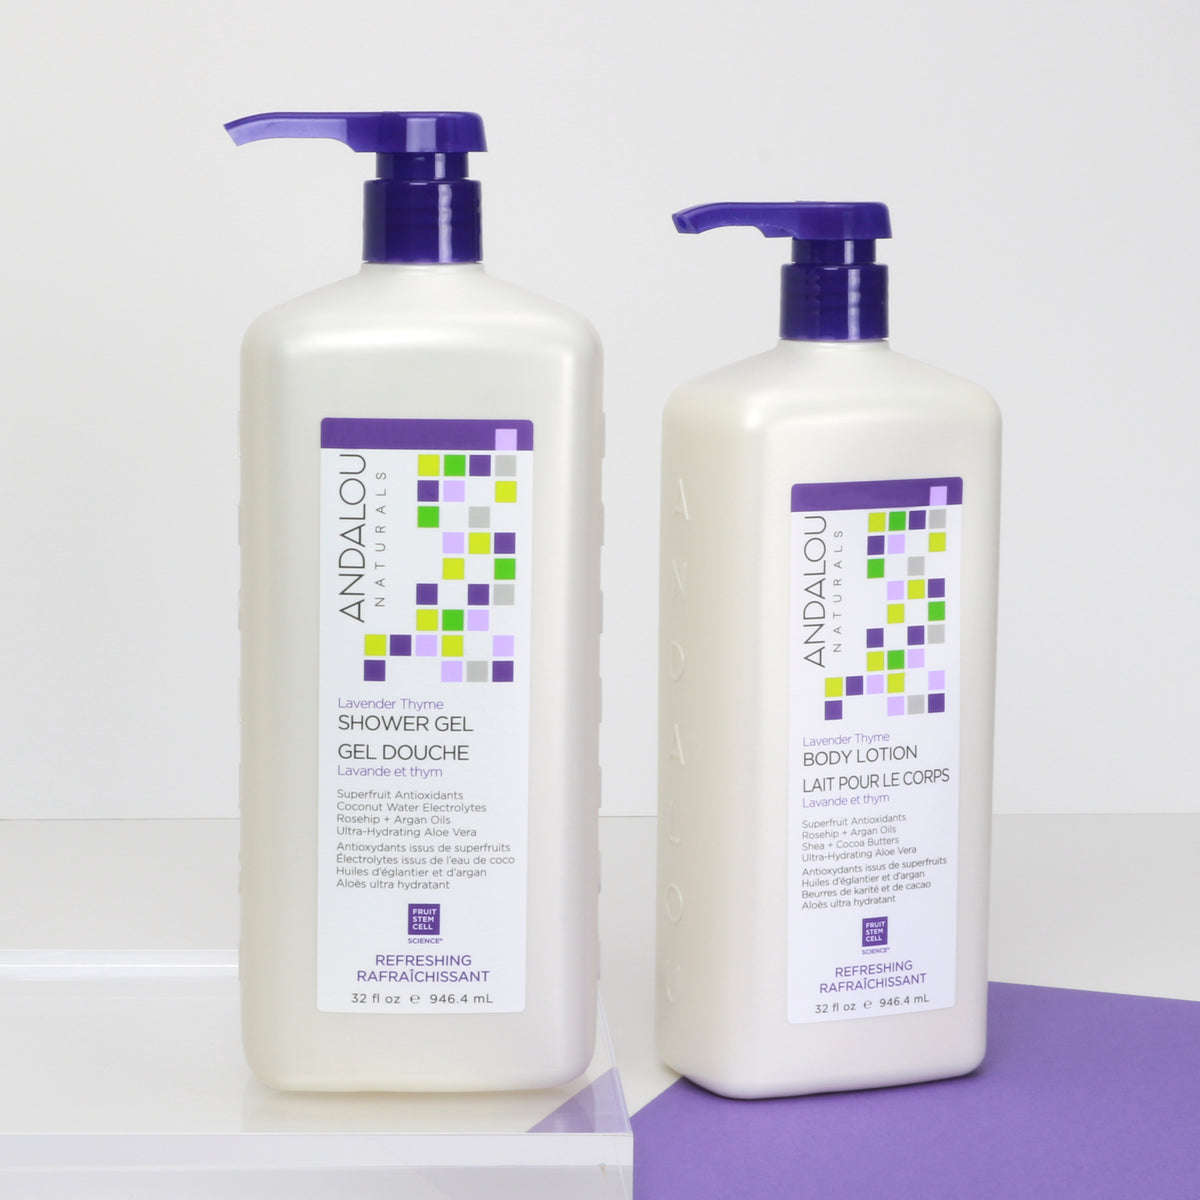 Lavender Thyme Refreshing Body Lotion - Value Size - Andalou Naturals US